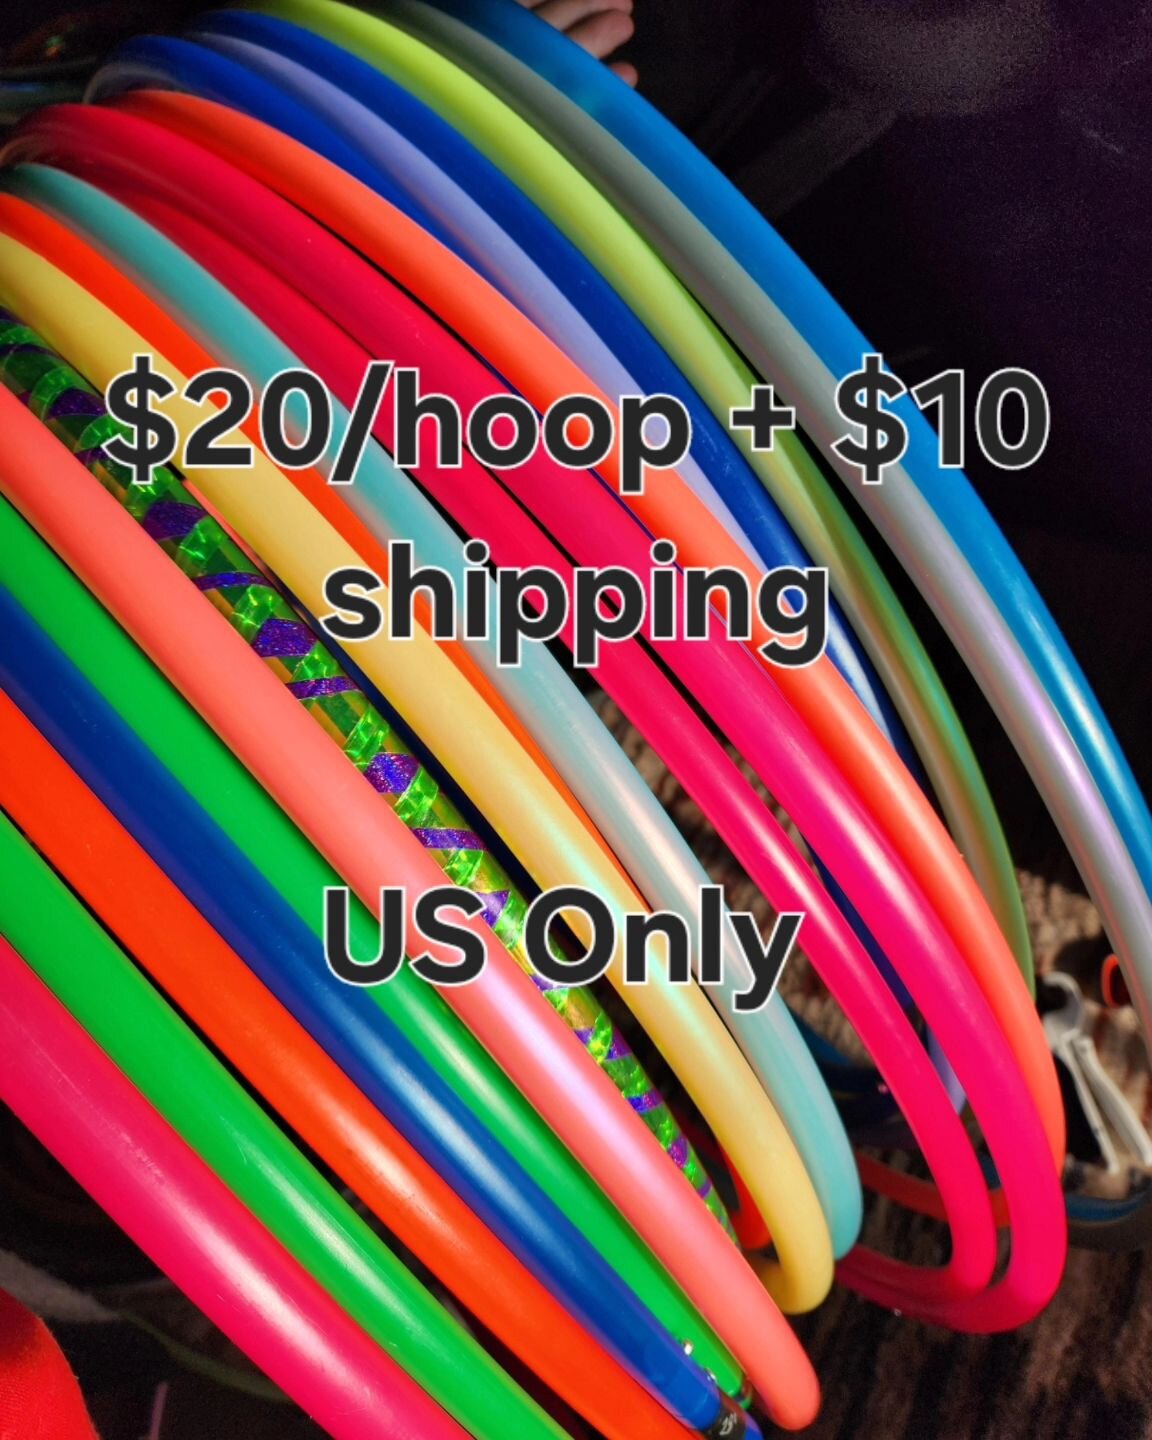 ✨️Discounted hoops leftover from vending - our loss is your gain!✨️

These hoops have minor scuffs and scrapes (most overall are not damaged) from being carried around and put on display, perfect if you're looking to try a new size, add a new color t